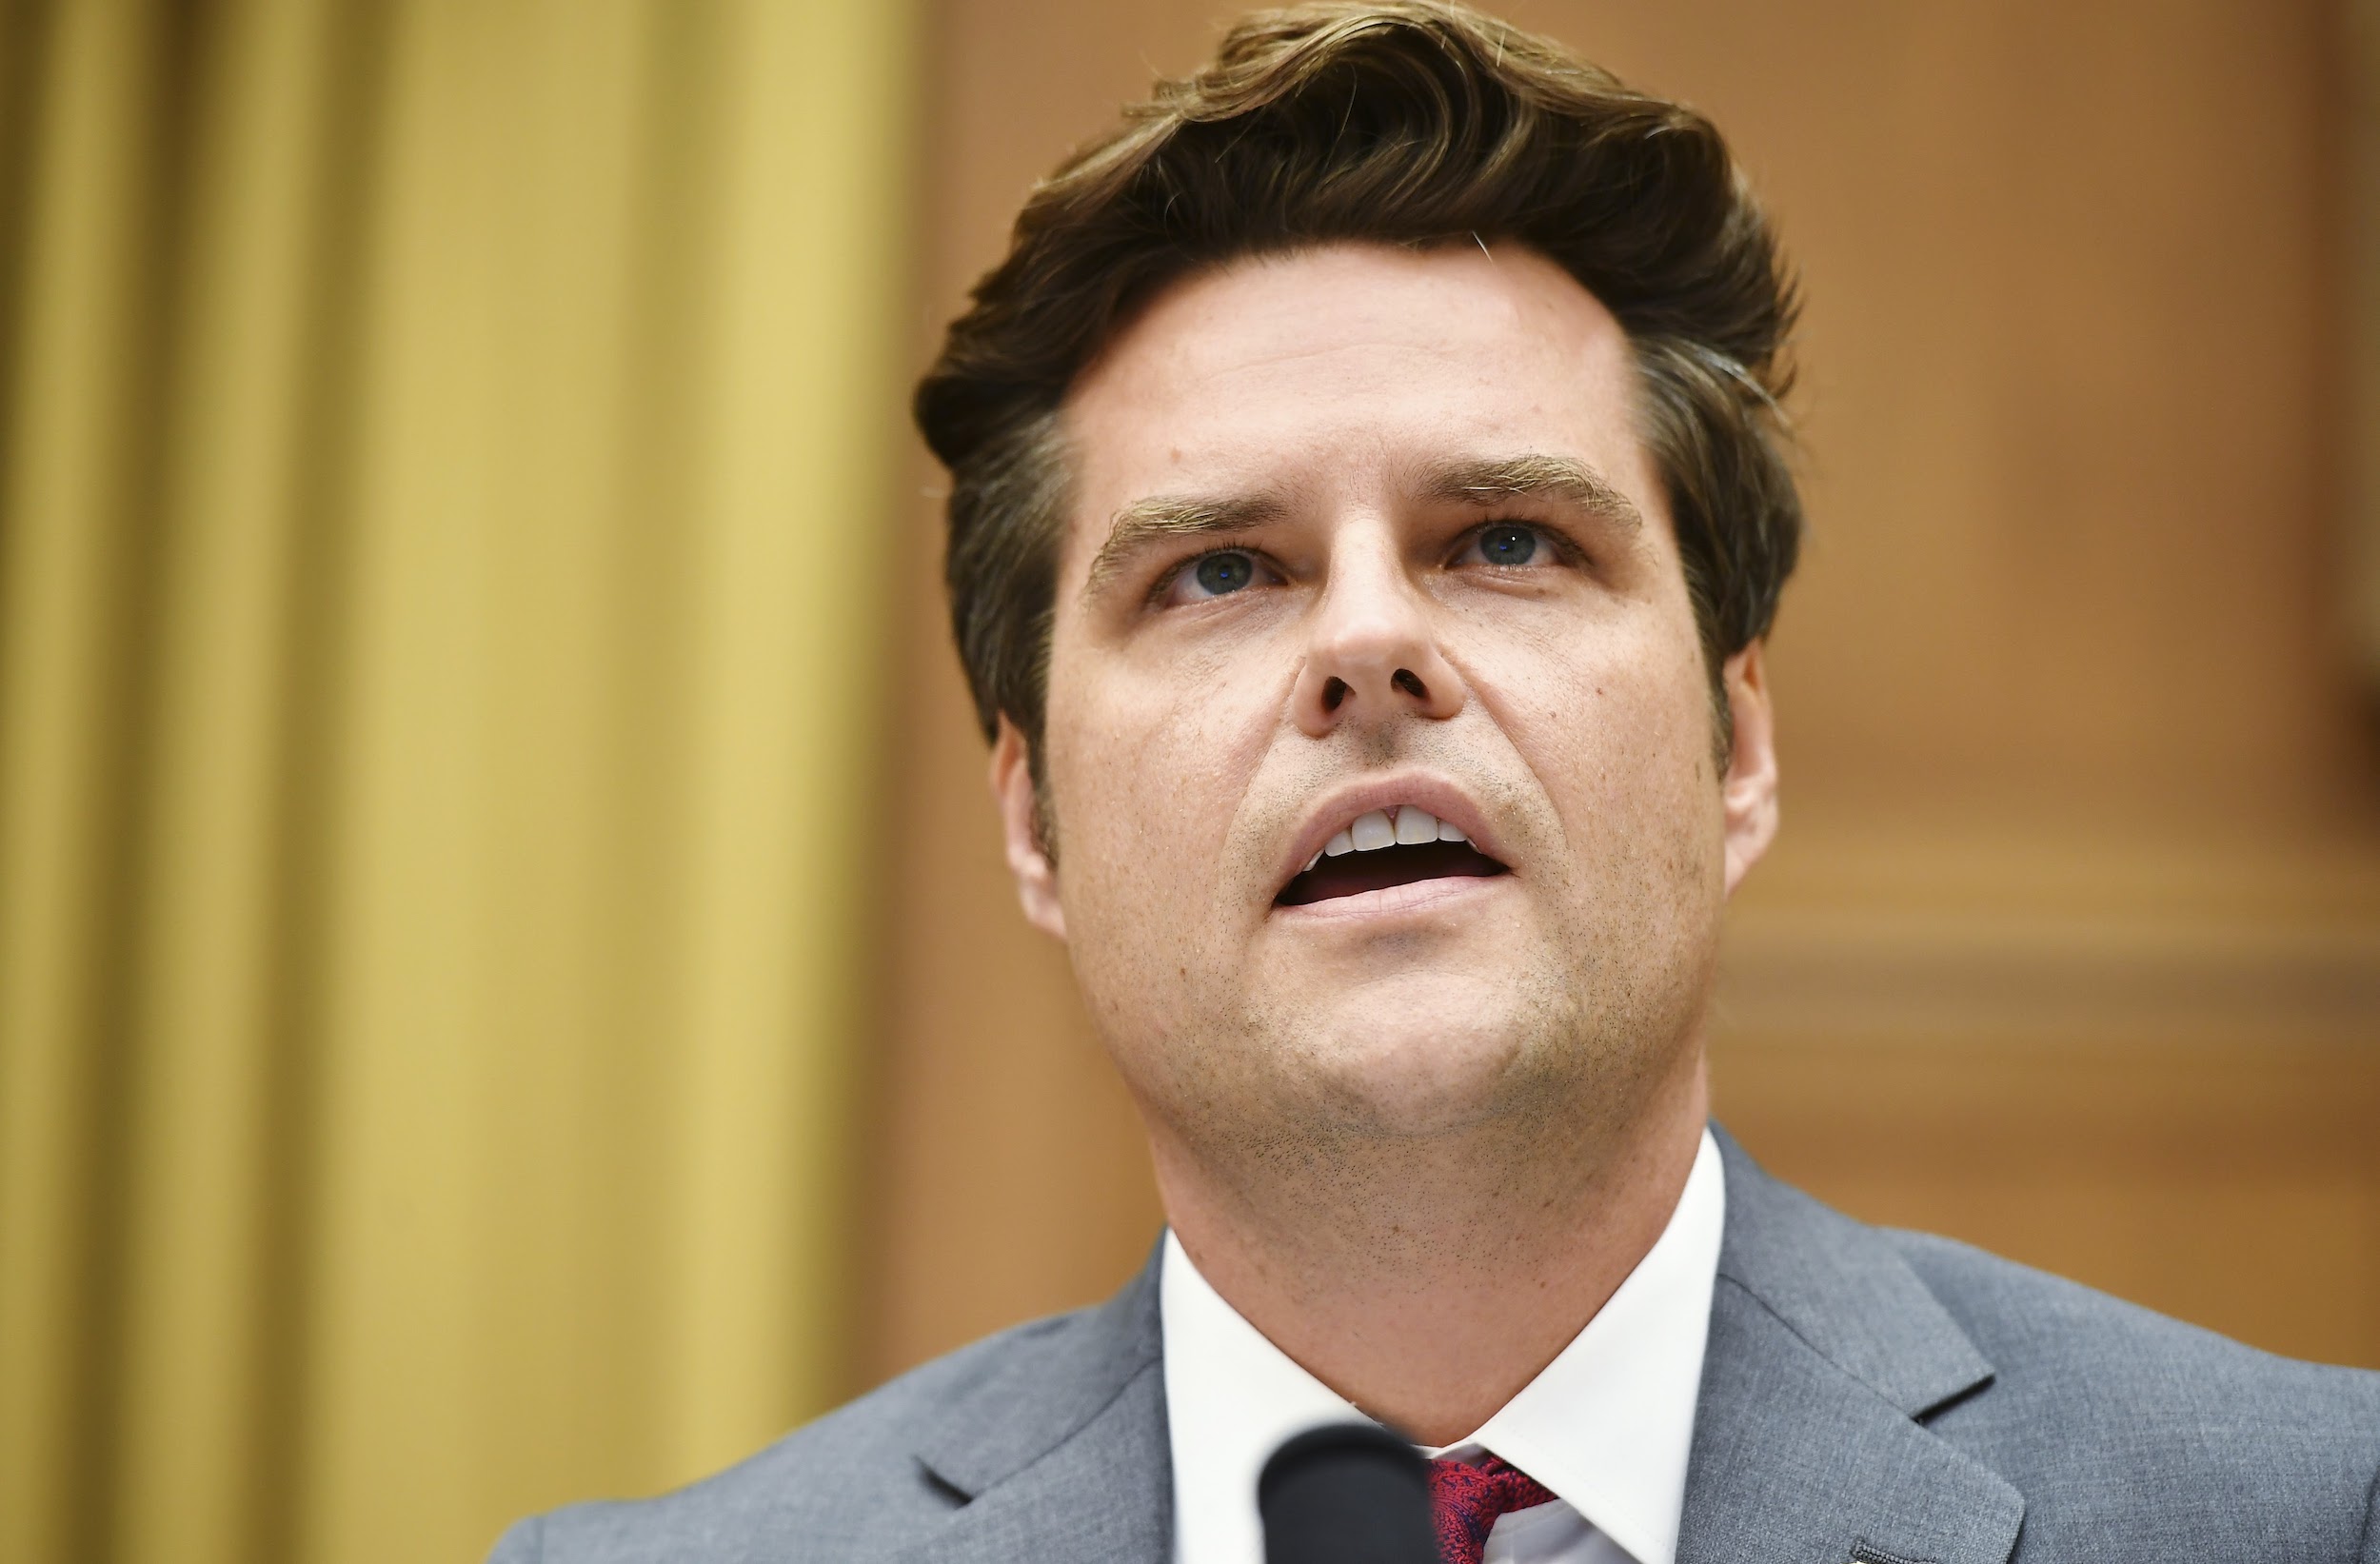 What's the Matt Gaetz story all about?